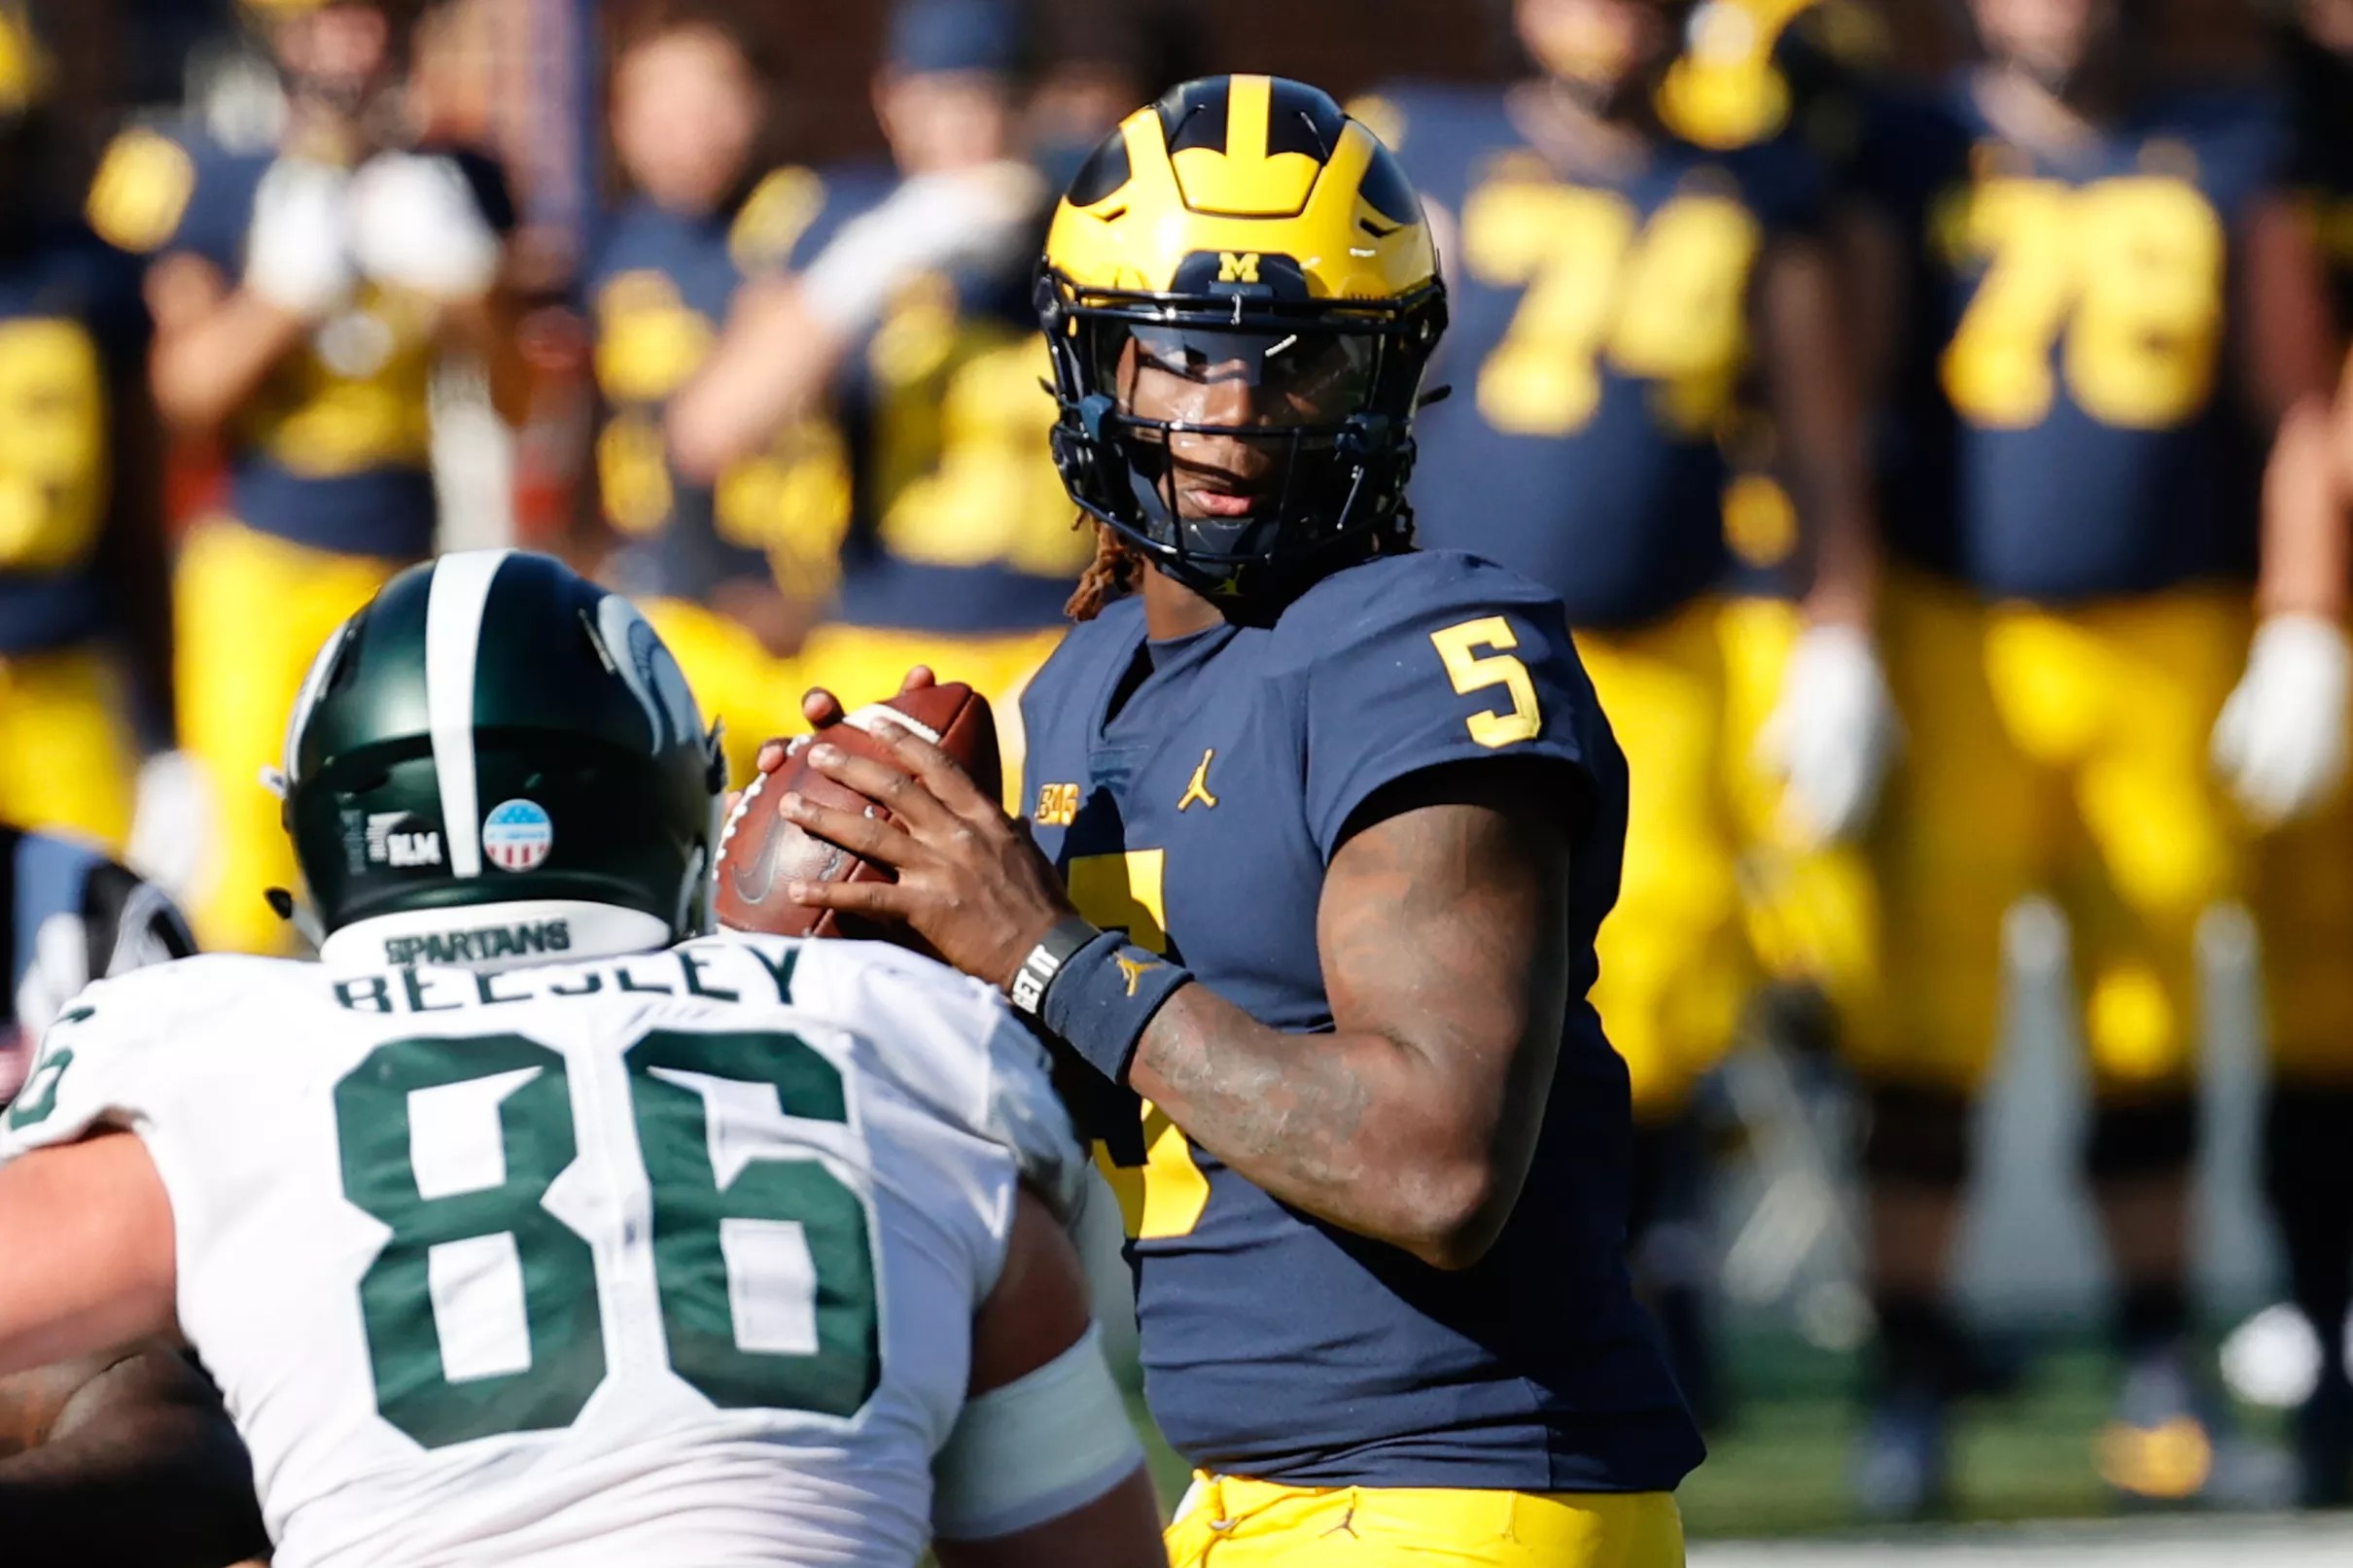 michigan-tied-for-6th-best-odds-to-make-college-football-playoff